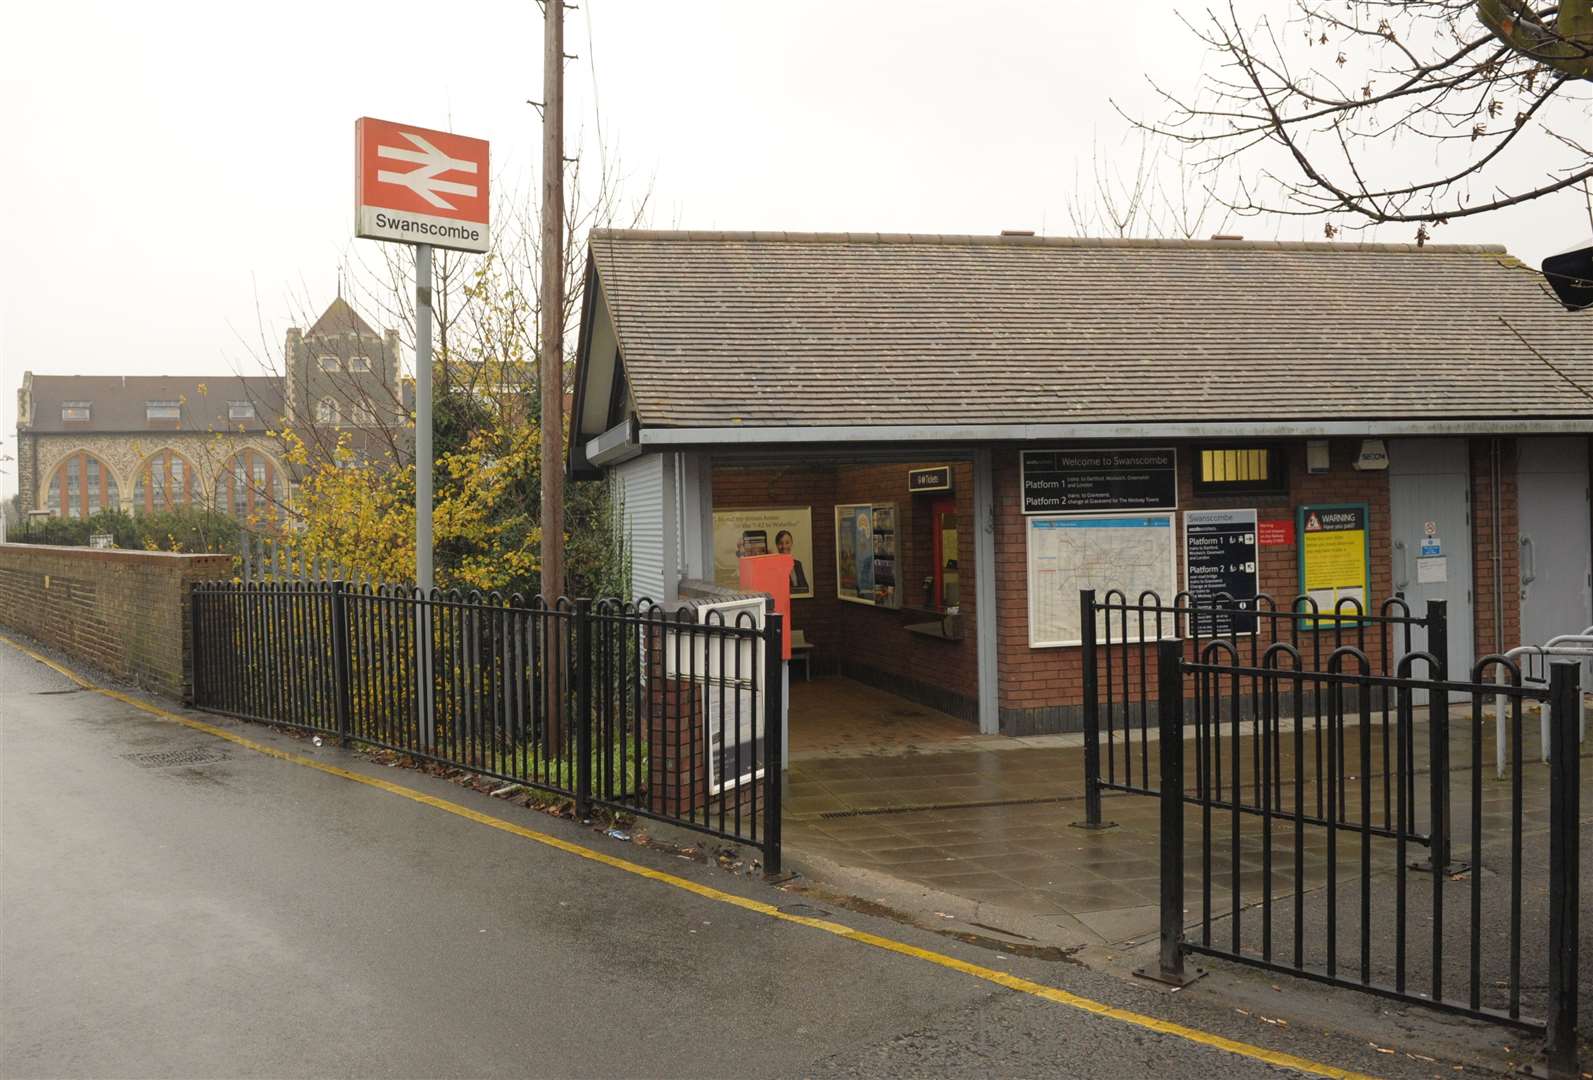 The 15-year-old fell onto tracks at Swanscombe railway station on Sunday